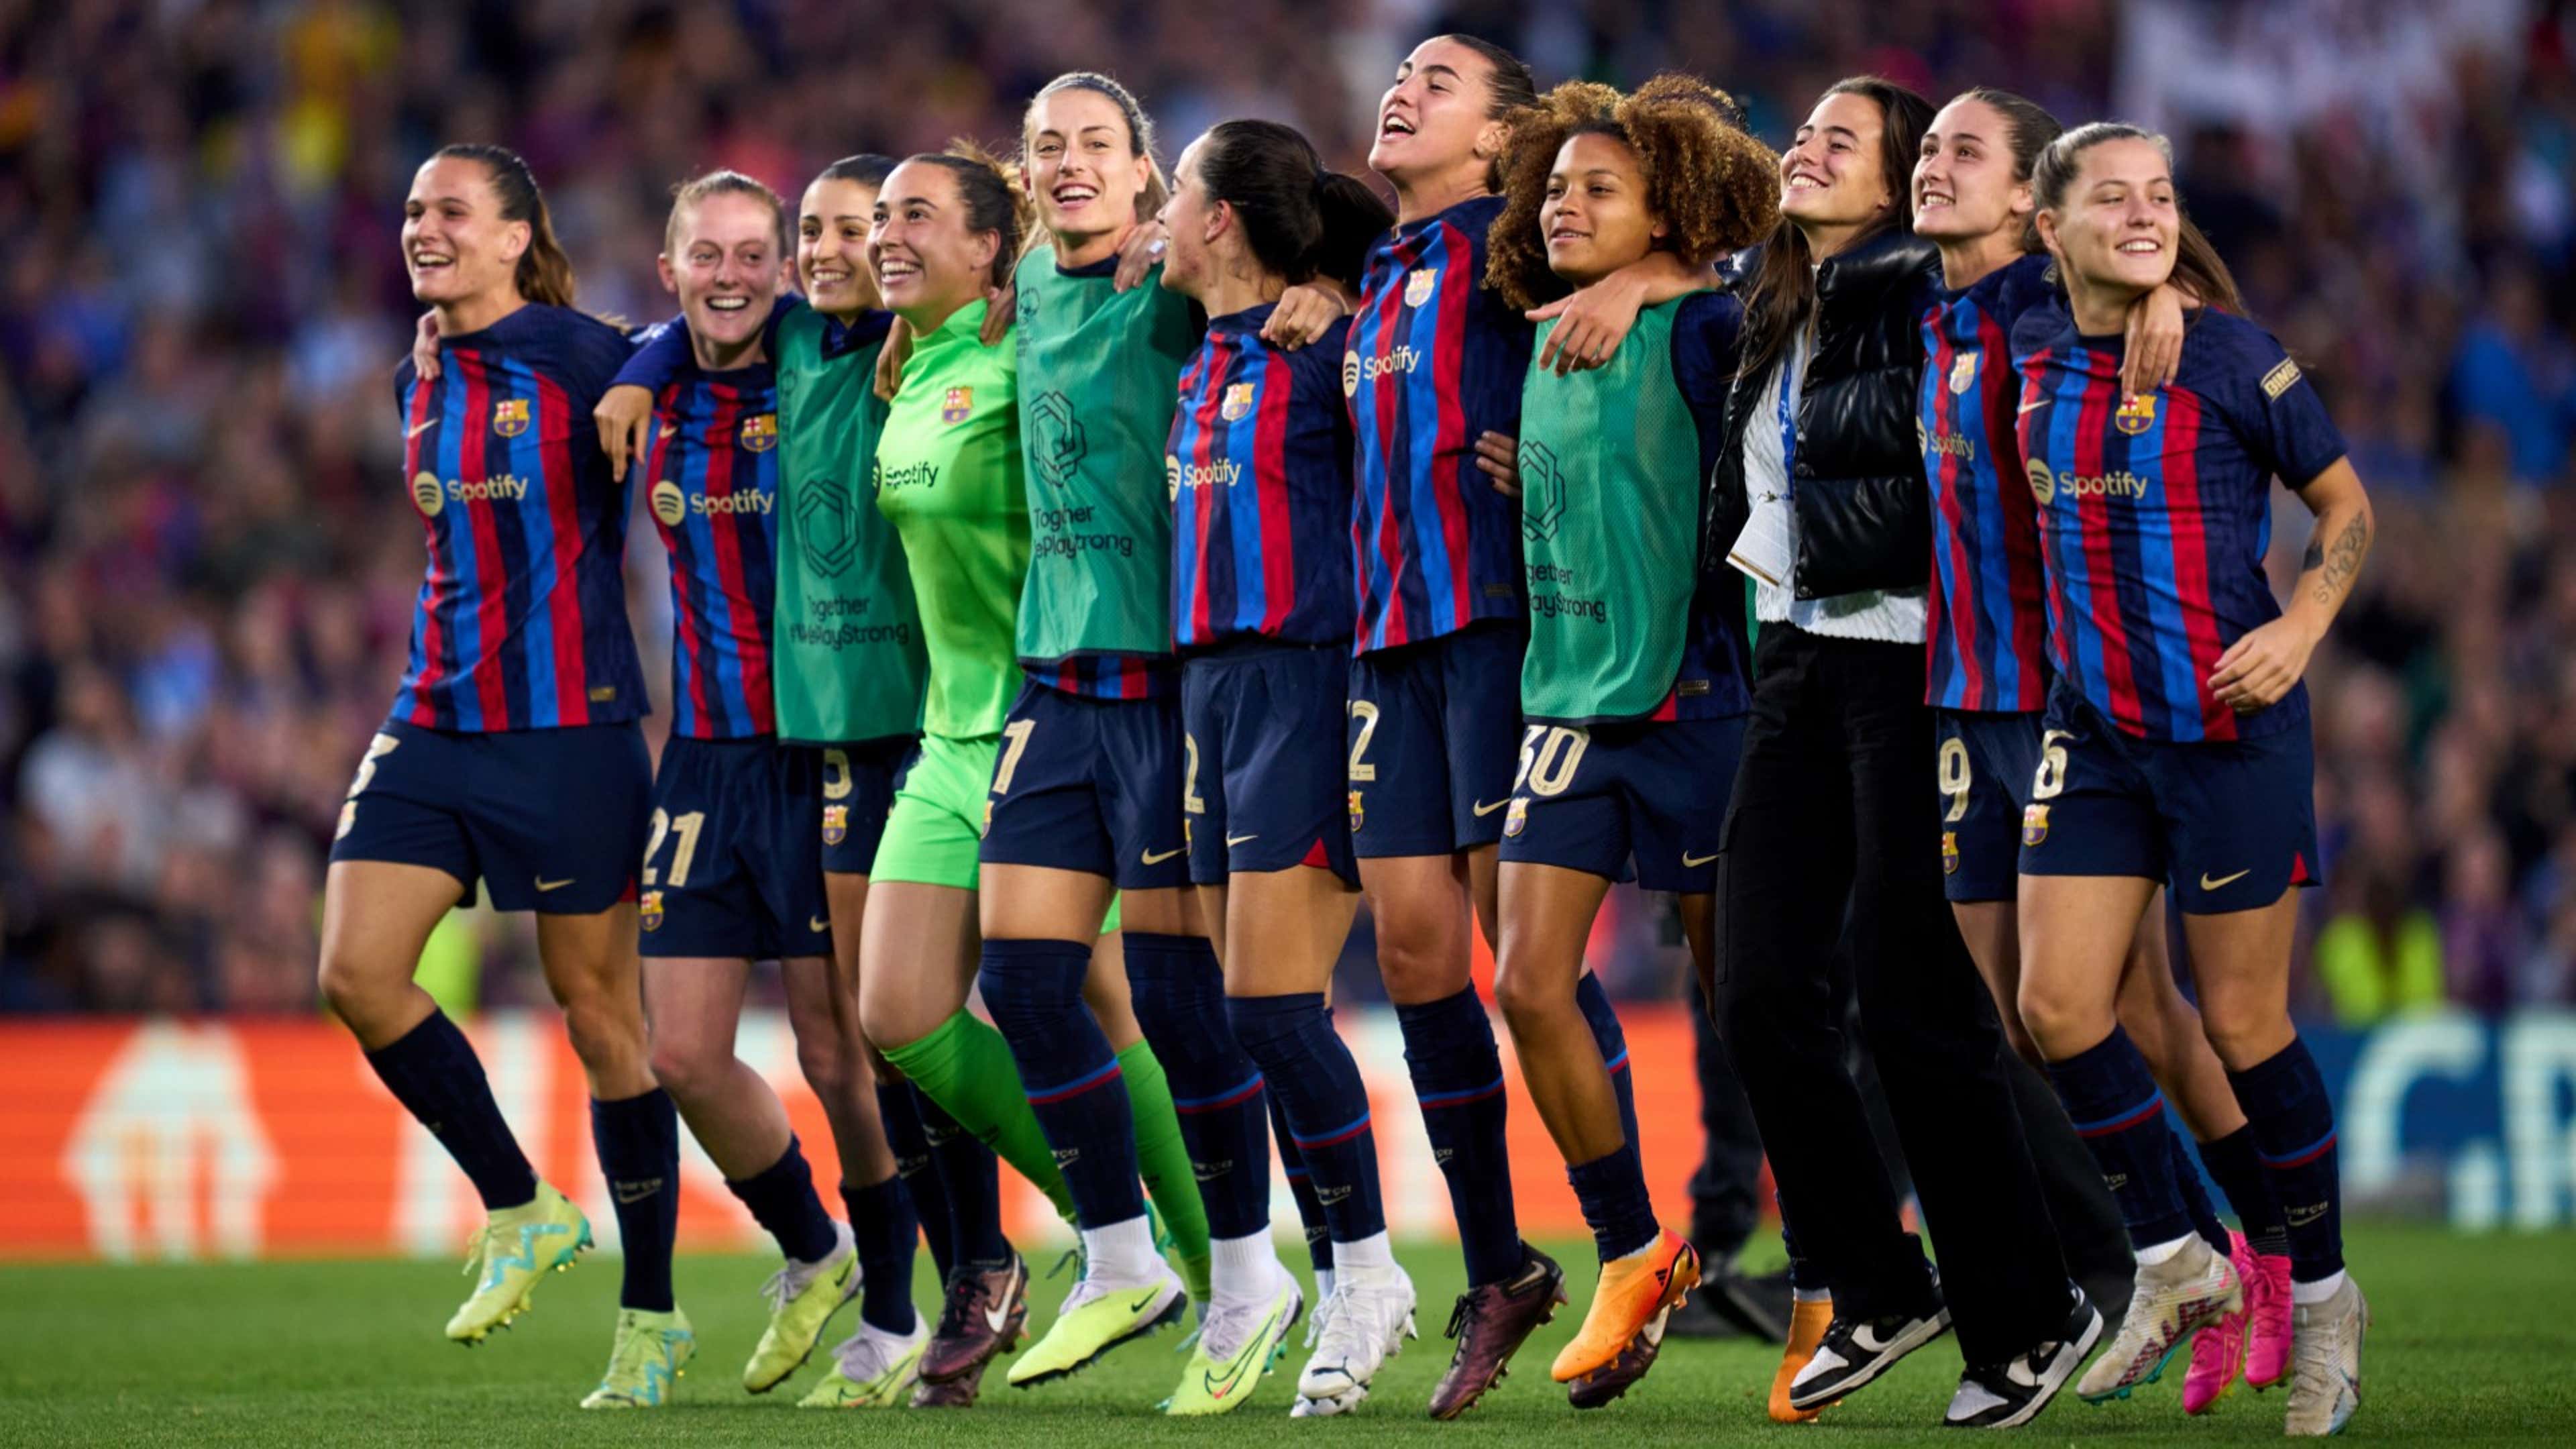 Women's Champions League final sold out for first time since 2009